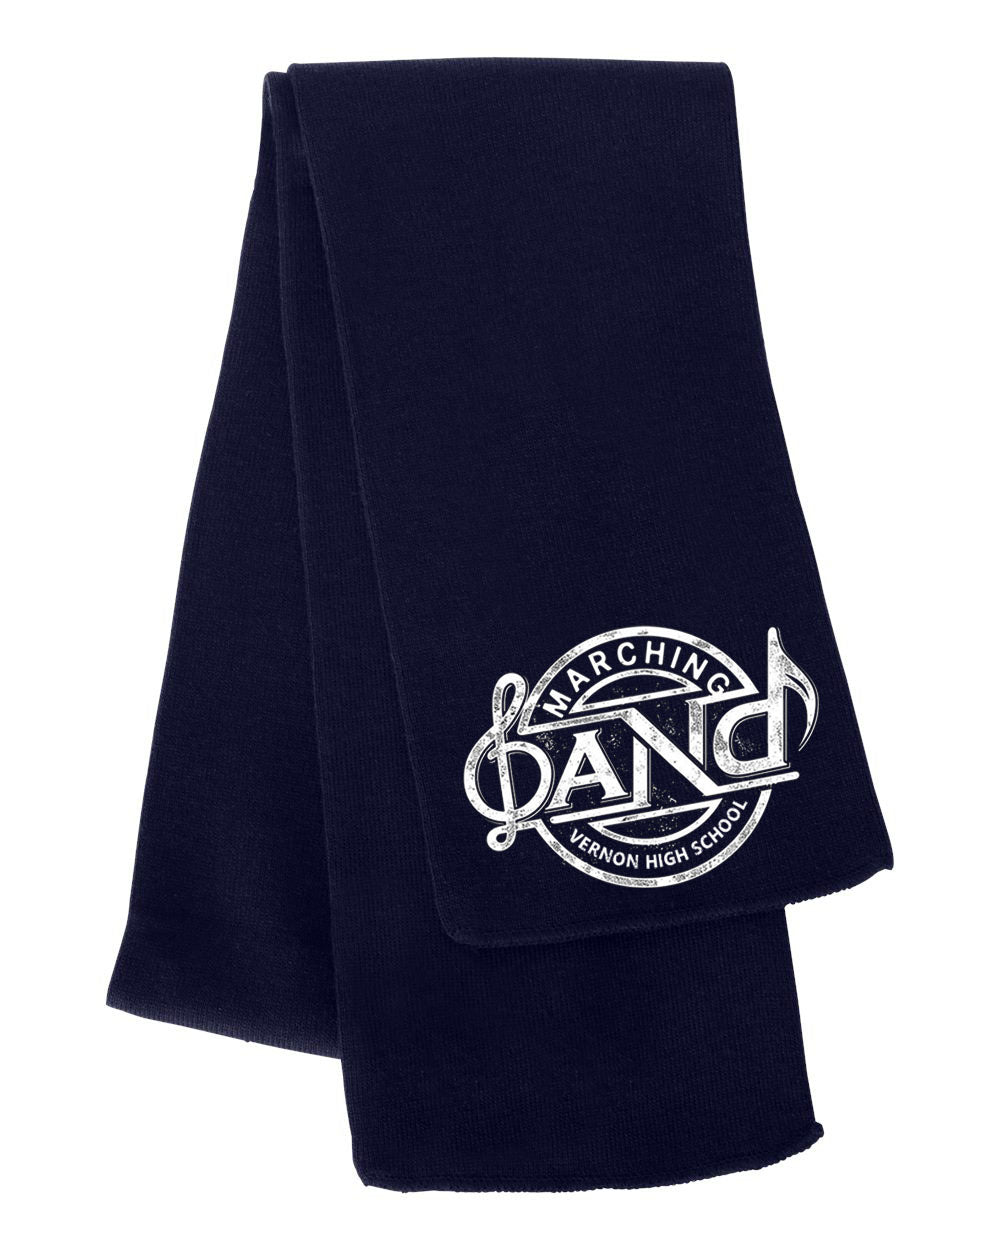 Vernon Marching Band design 1 Scarf